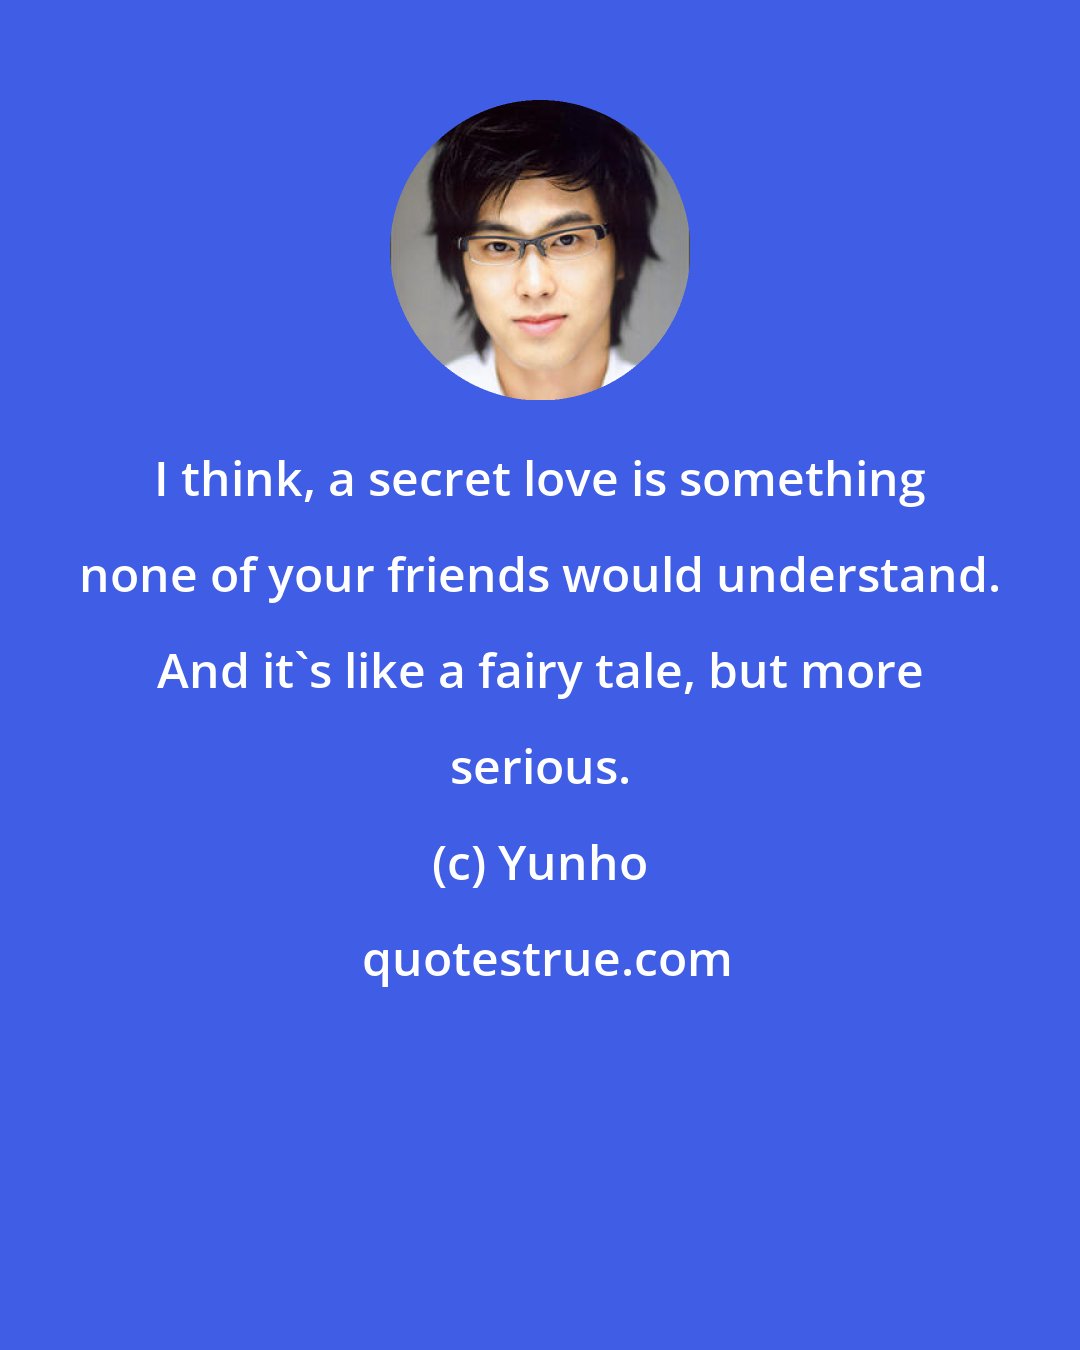 Yunho: I think, a secret love is something none of your friends would understand. And it's like a fairy tale, but more serious.